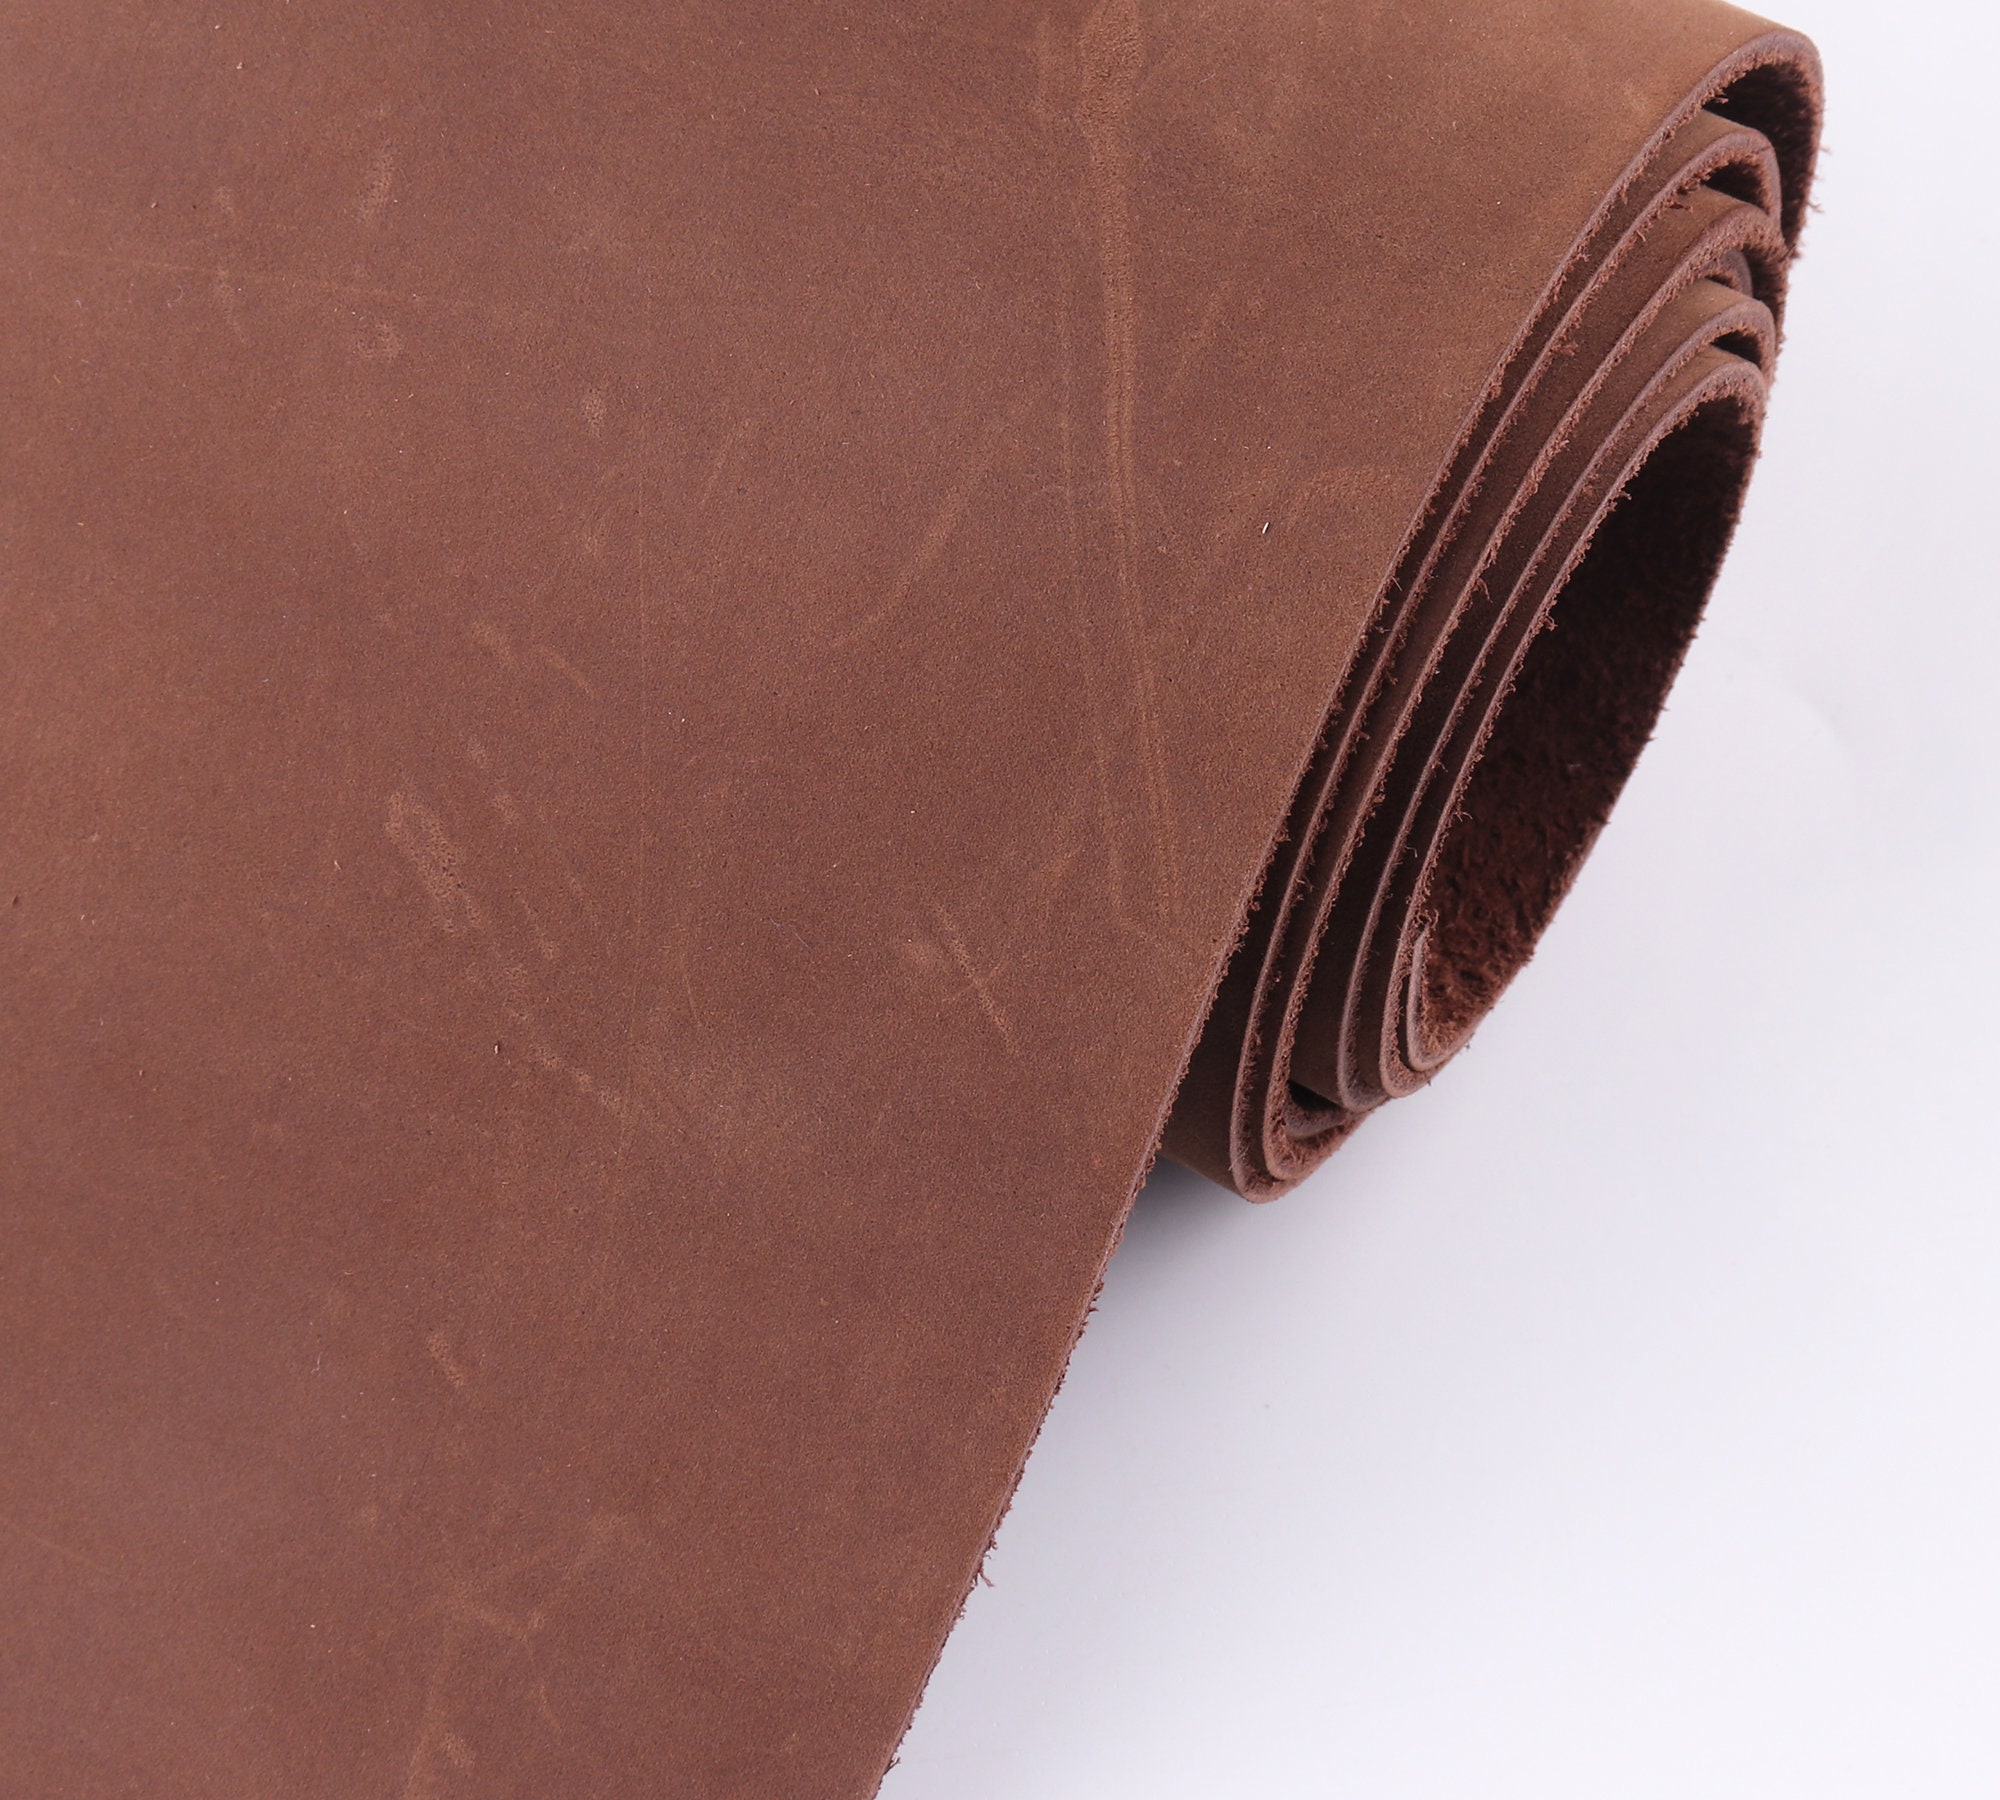 LeatherAA Italian Leather Company Brown Leather Hide Leather Sheets: 4 Brown Scrap Leather Pieces Leather Sheets for Craft 5x5In/ 12x12cm